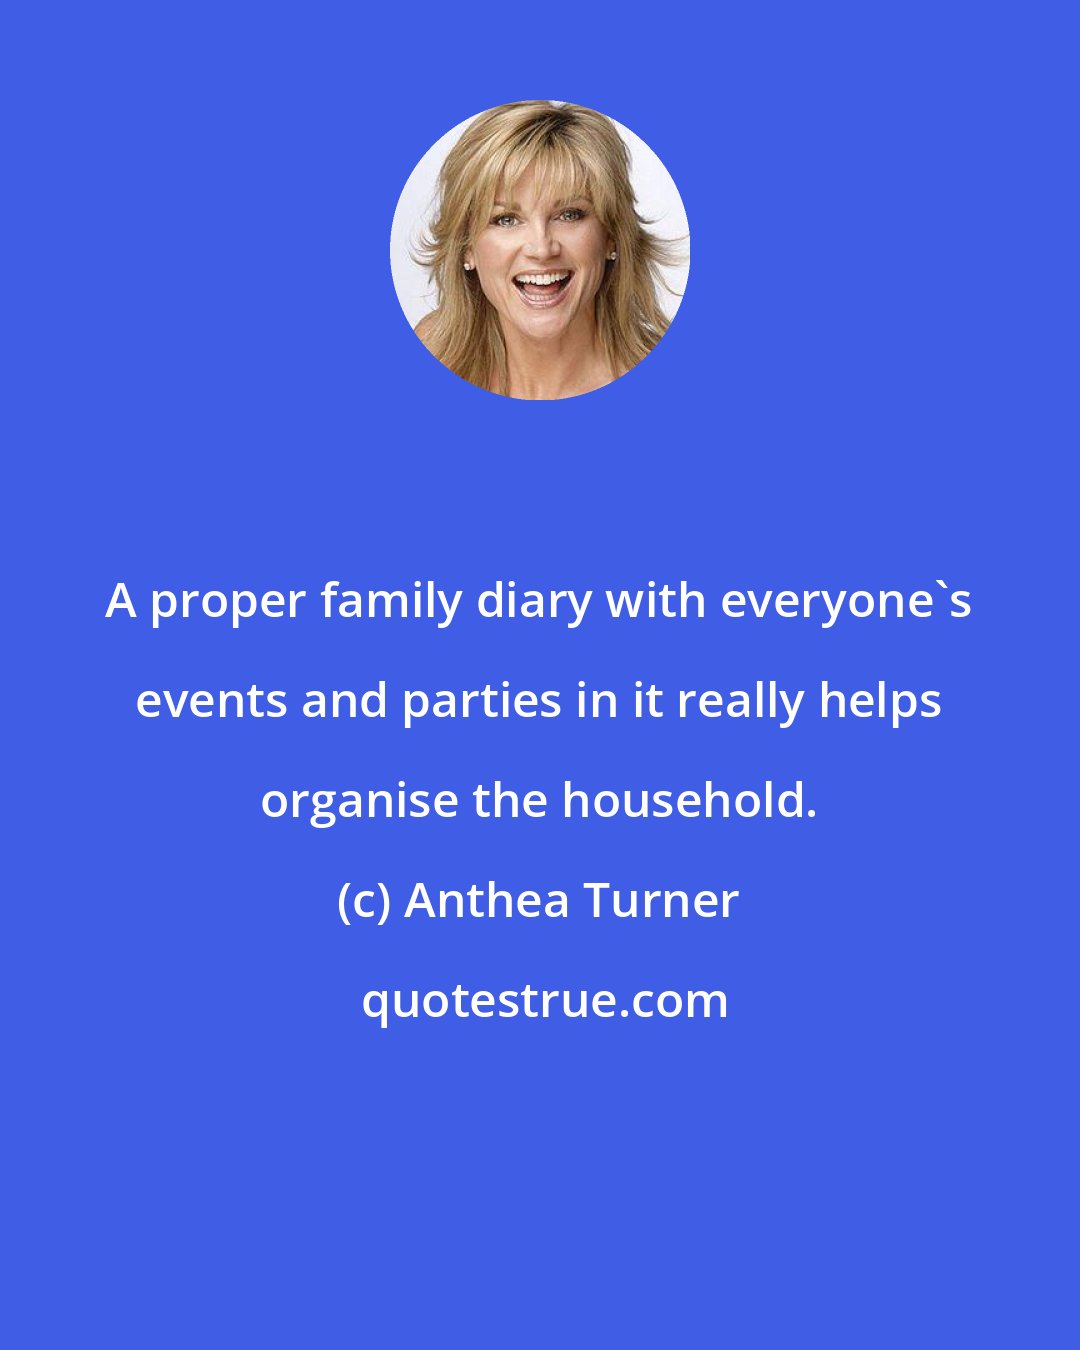 Anthea Turner: A proper family diary with everyone's events and parties in it really helps organise the household.